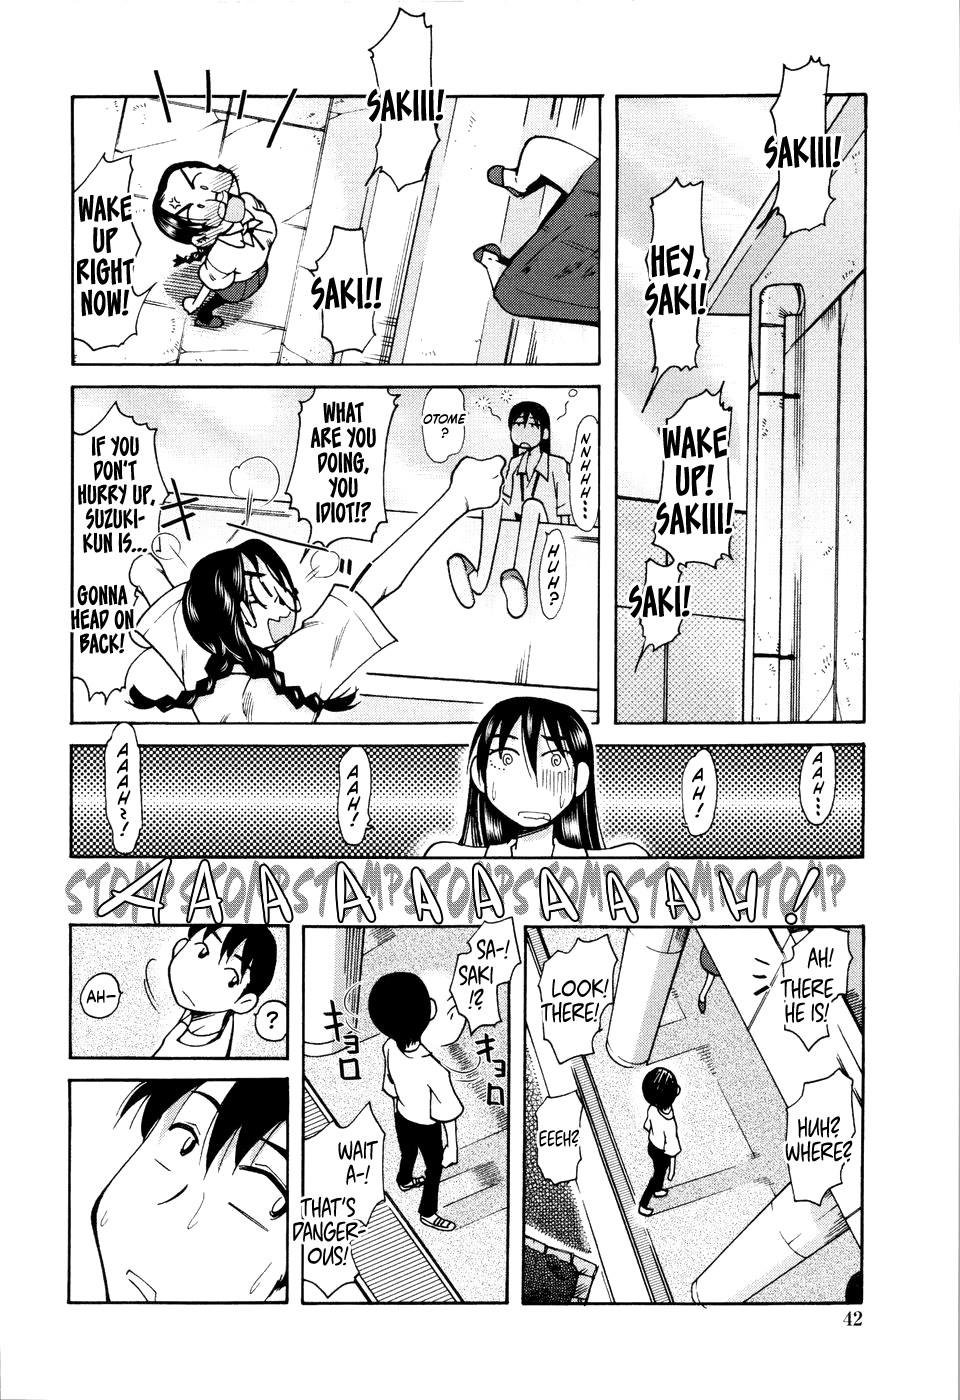 Hentai Manga Comic-Love Dere - It Is Crazy About Love.-Chapter 3-5-4